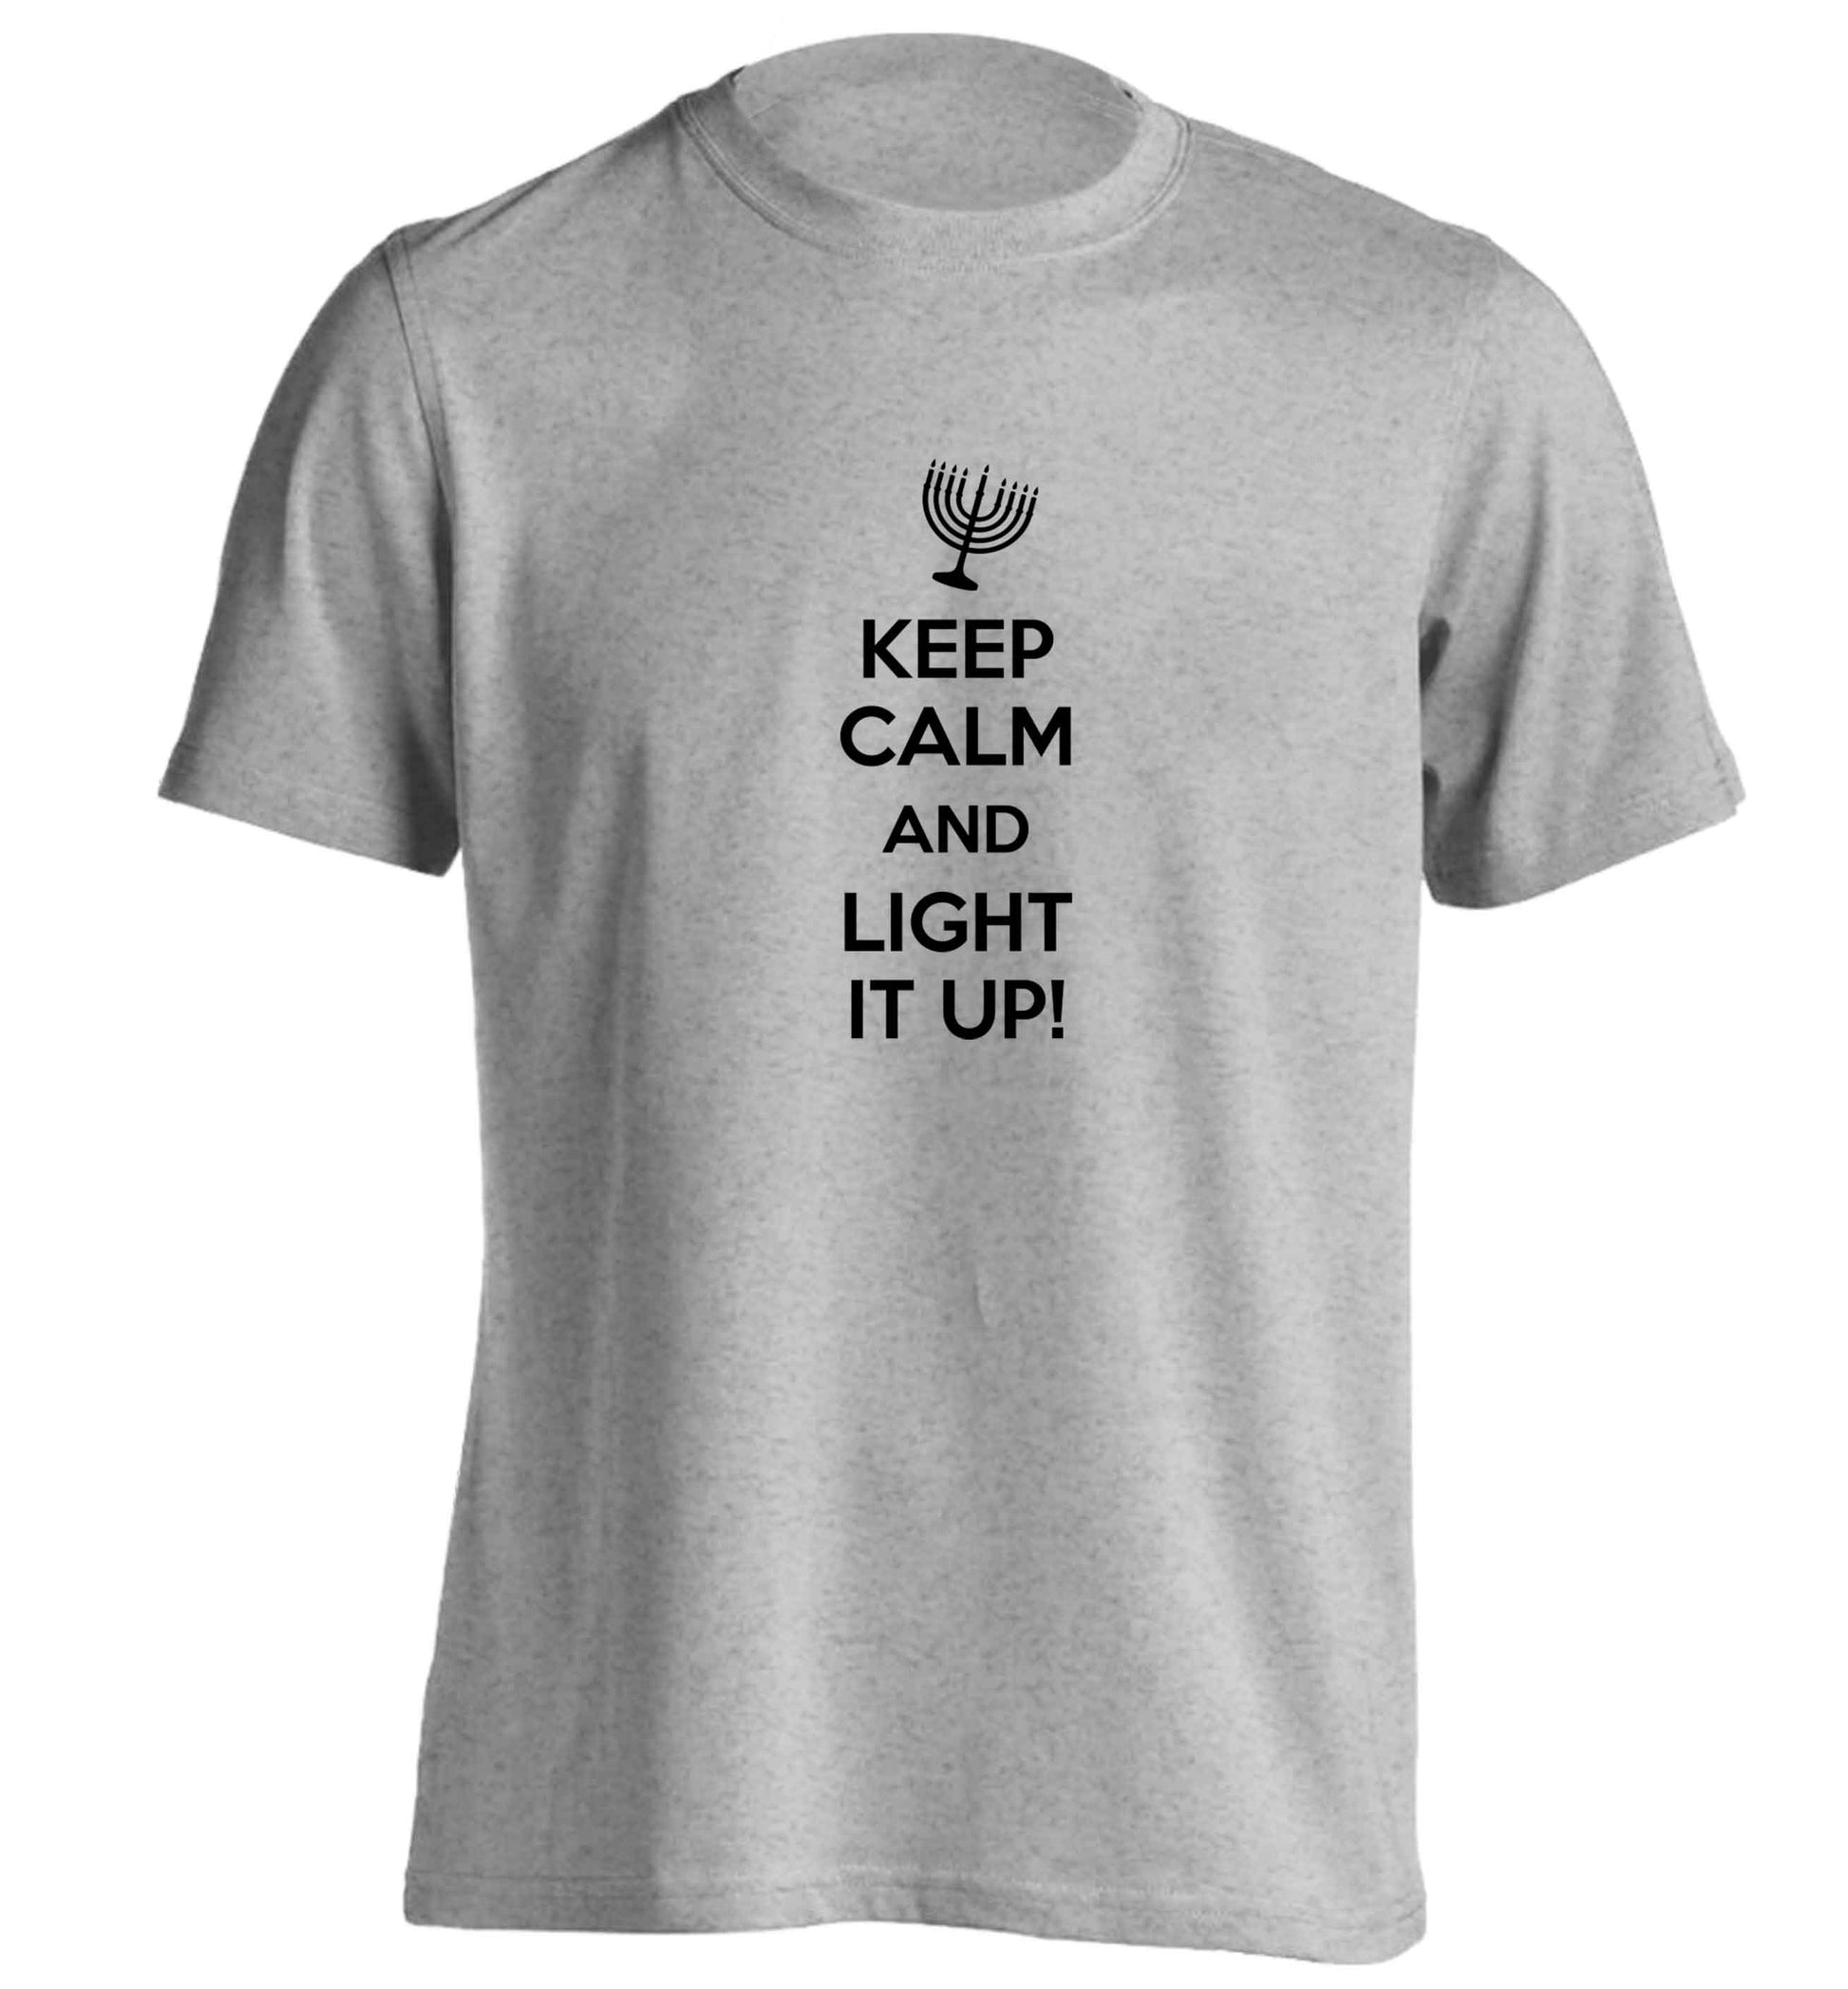 Keep calm and light it up adults unisex grey Tshirt 2XL